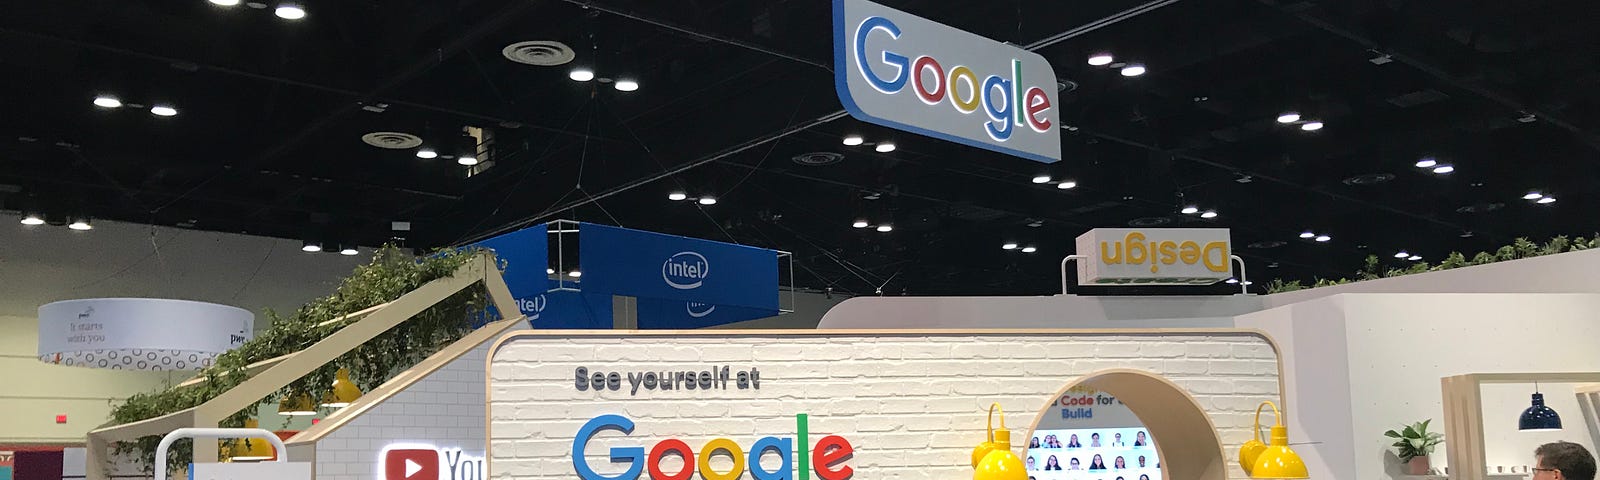 The Google booth